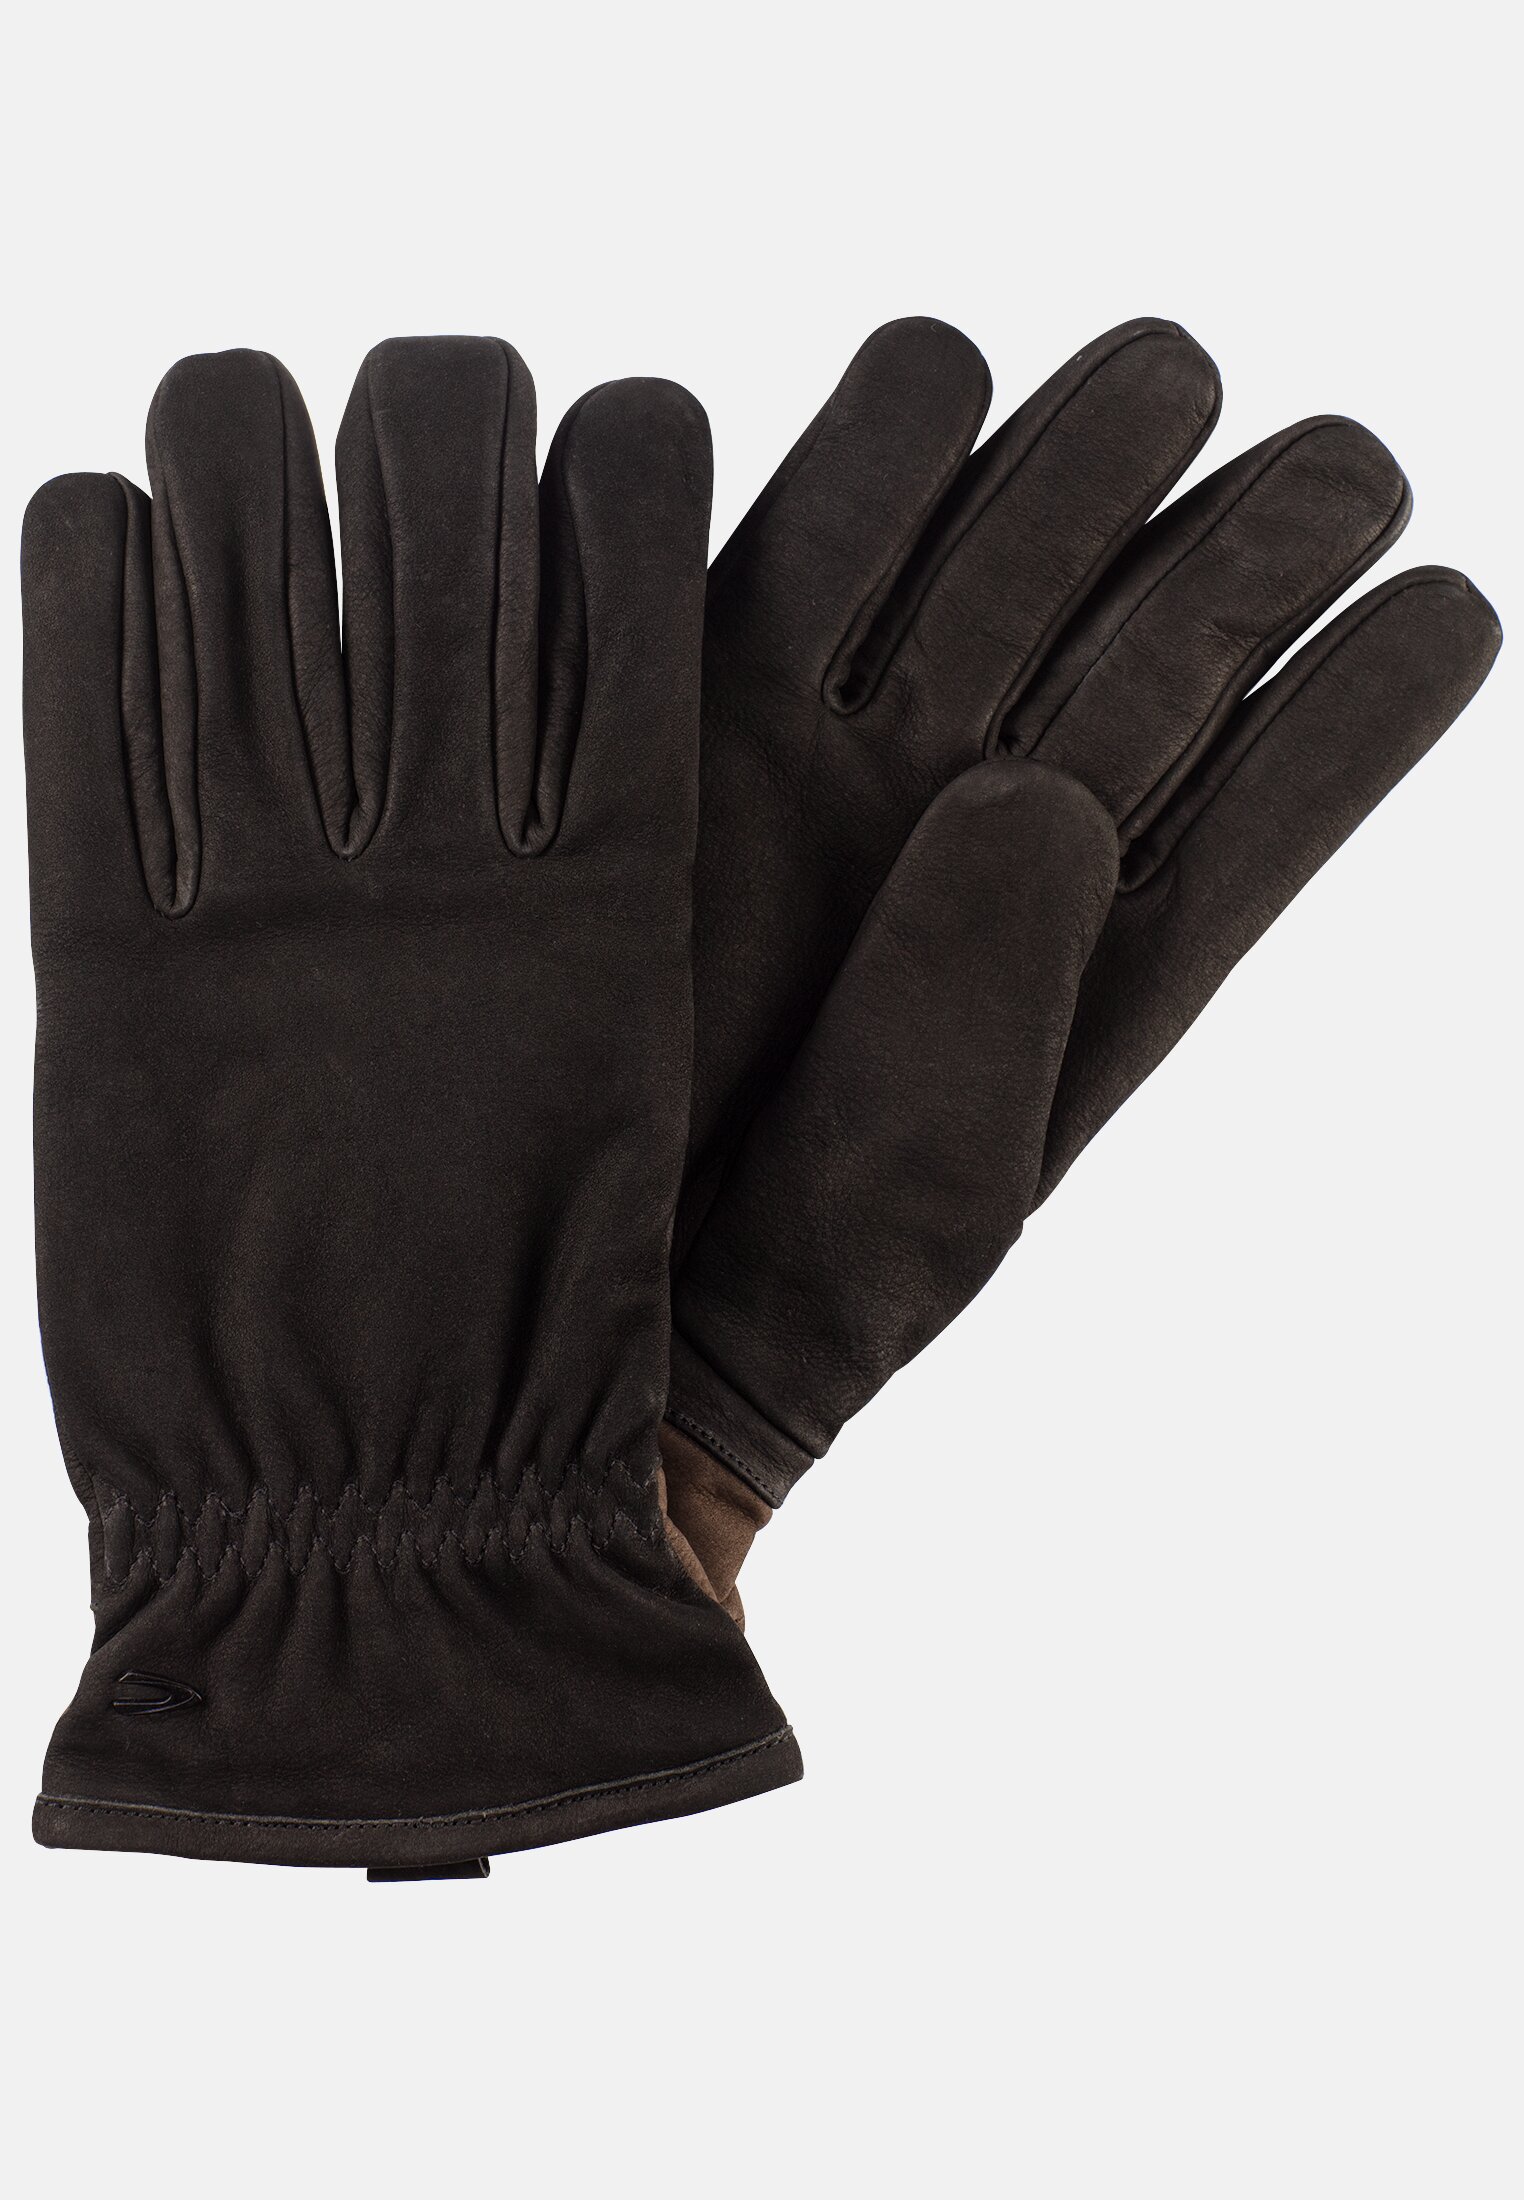 Camel Active High quality leather gloves in a gift box